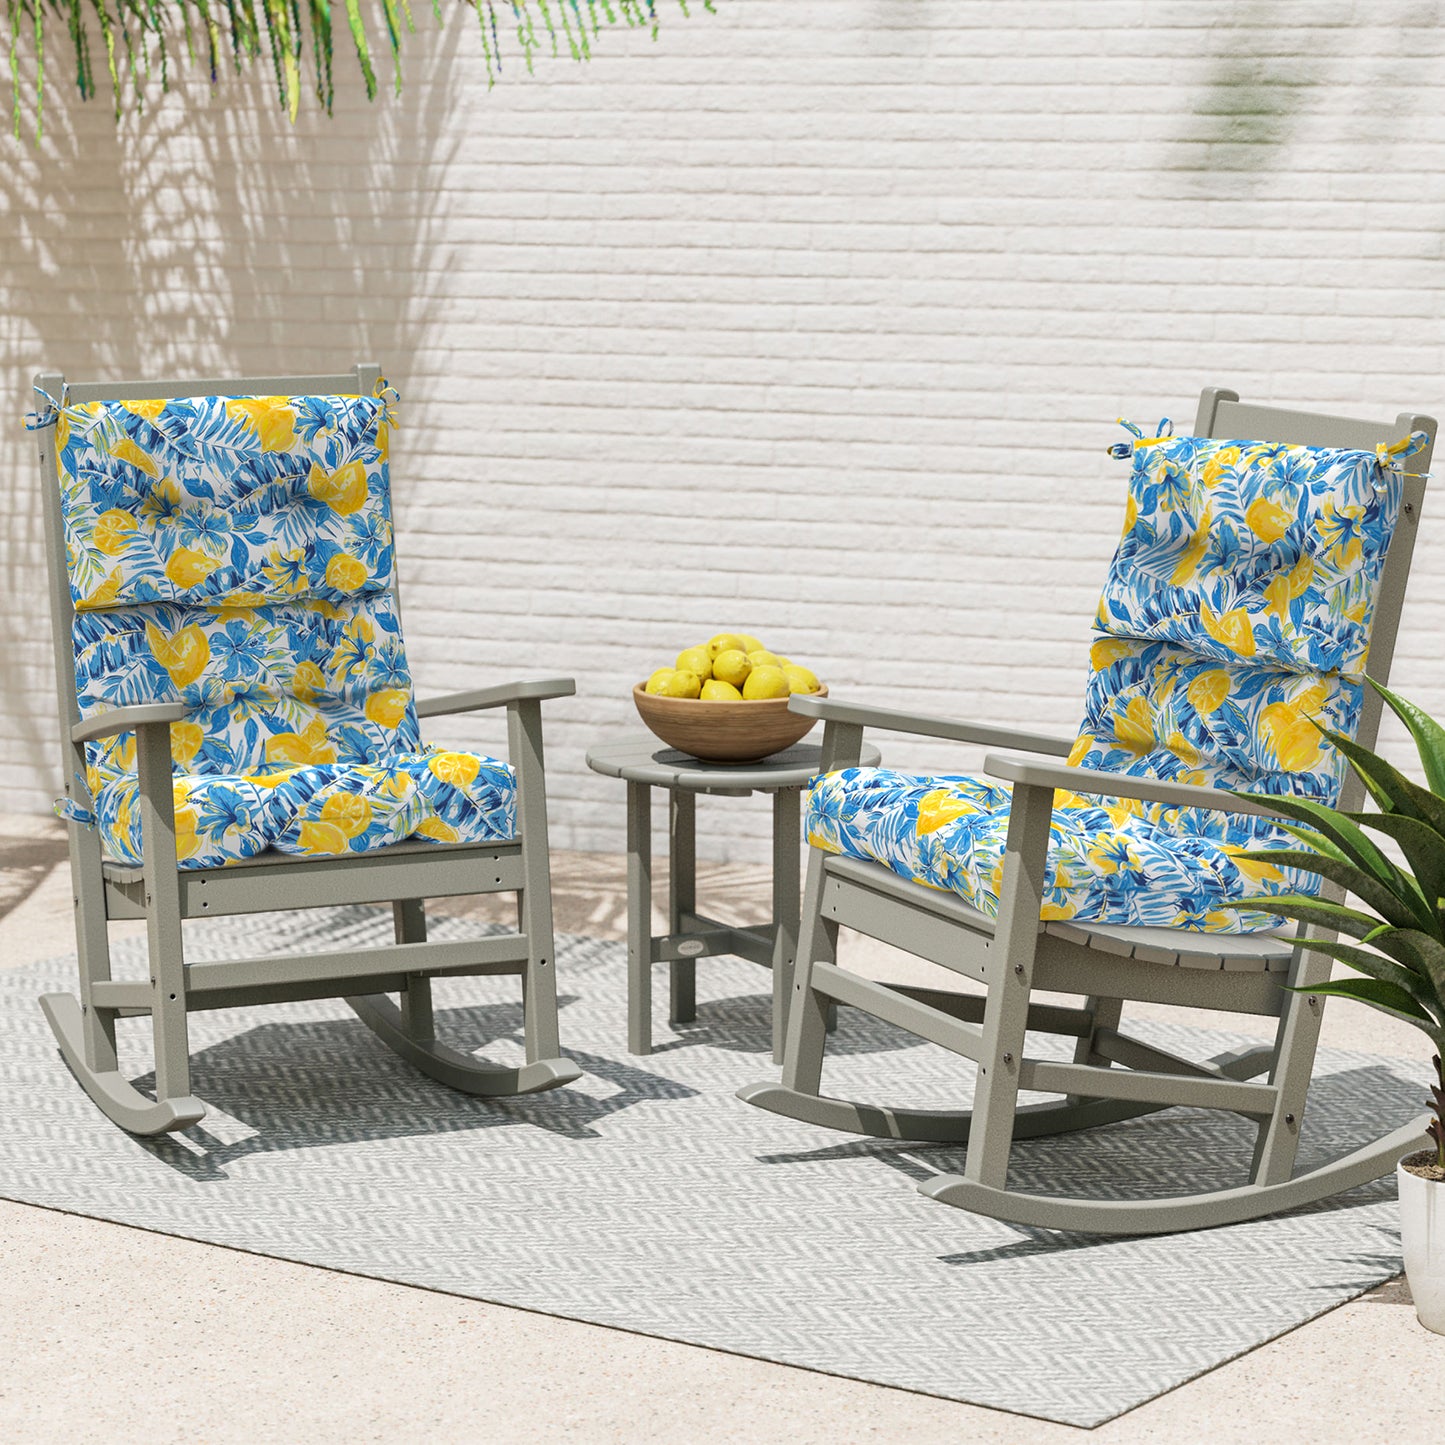 Melody Elephant Outdoor Tufted High Back Chair Cushions, Water Resistant Rocking Seat Chair Cushions 2 Pack, Adirondack Cushions for Patio Home Garden, 22" W x 20" D, Lemon Blossom Blue